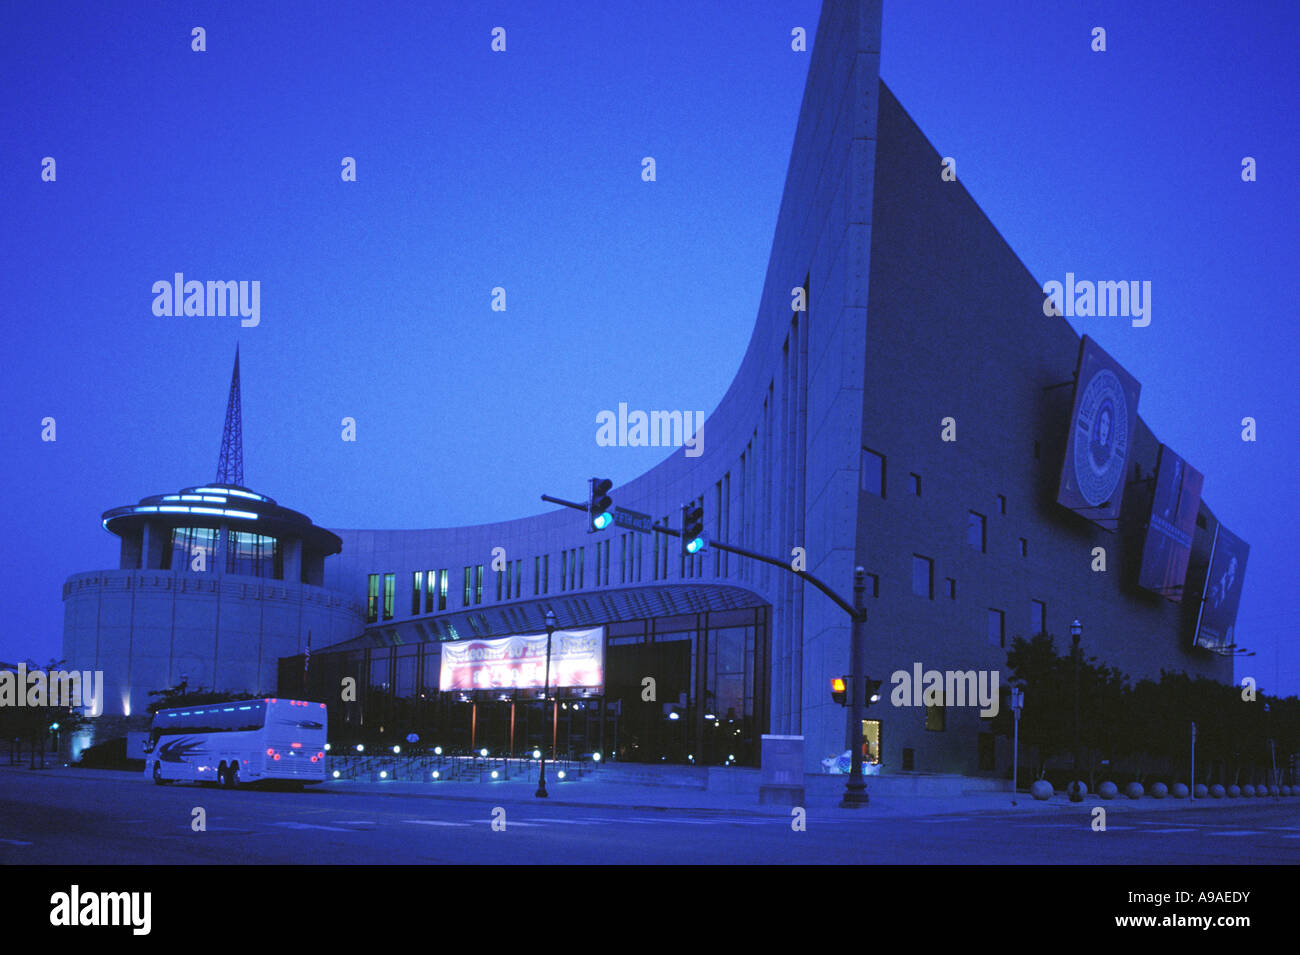 COUNTRY MUSIC HALL OF FAME (©TUCKHINTON ARCHITECTS PLC 2001) DOWNTOWN